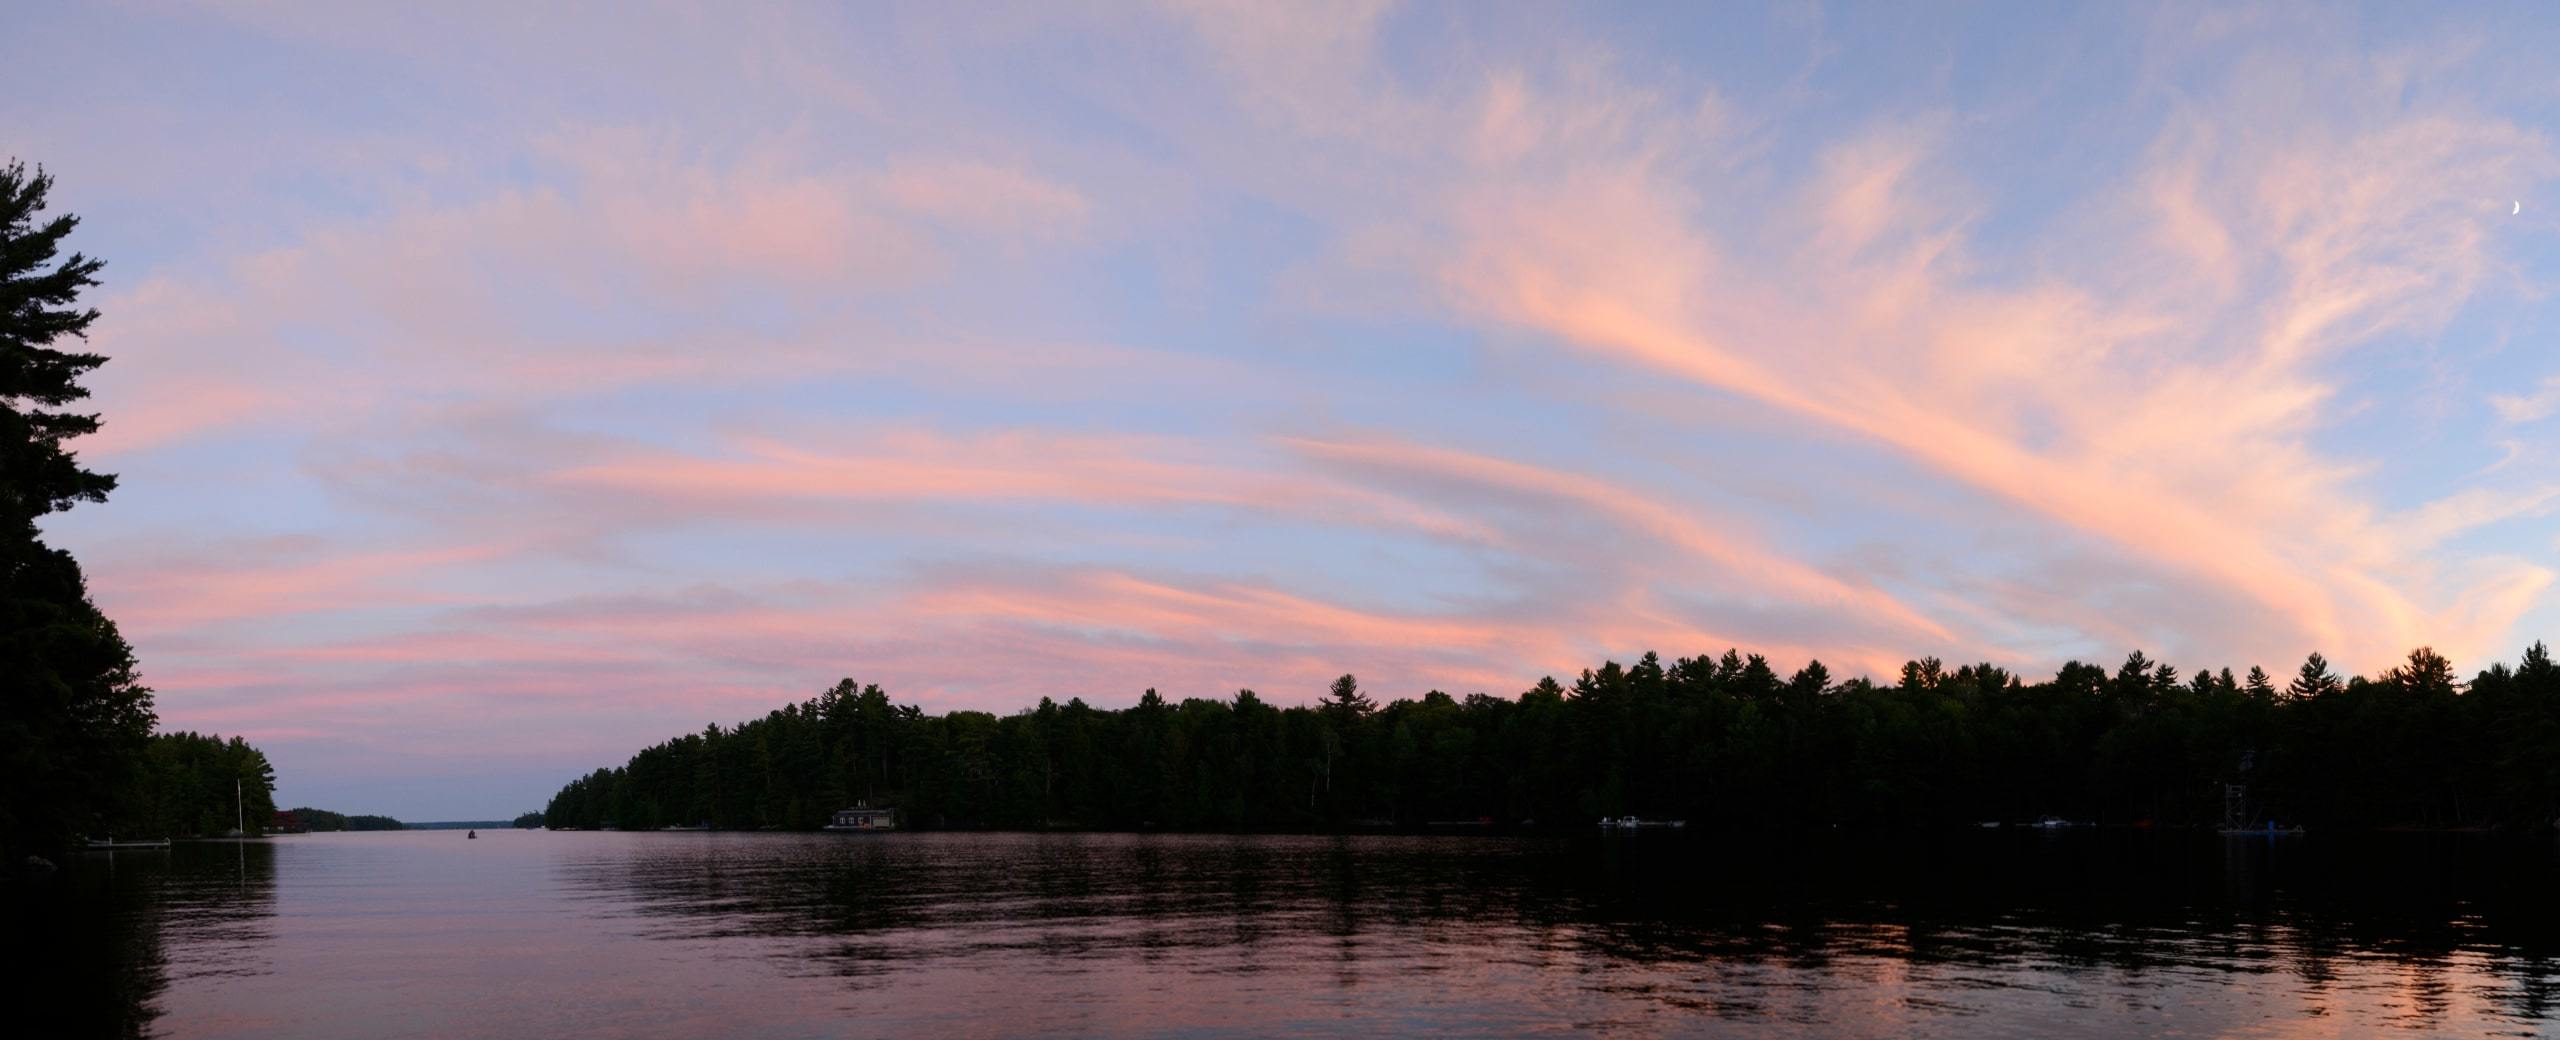 Pink sunset over forest and Lake Muskoka